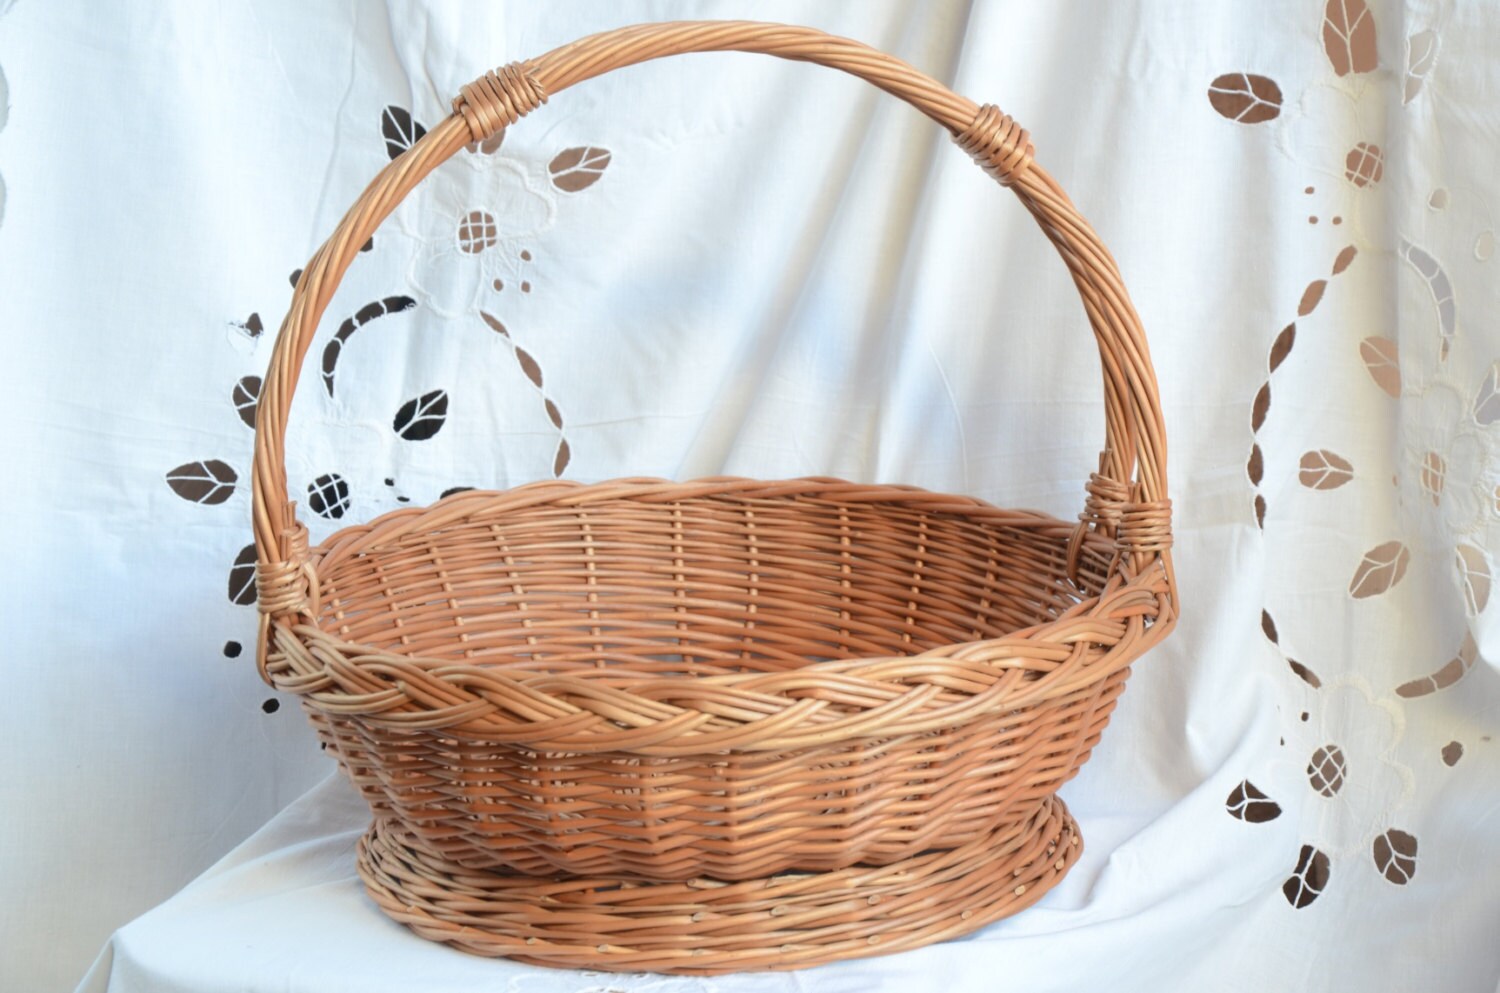 Vintage Woven Wicker Gathering Basket with Top Handle 22.5″ Long